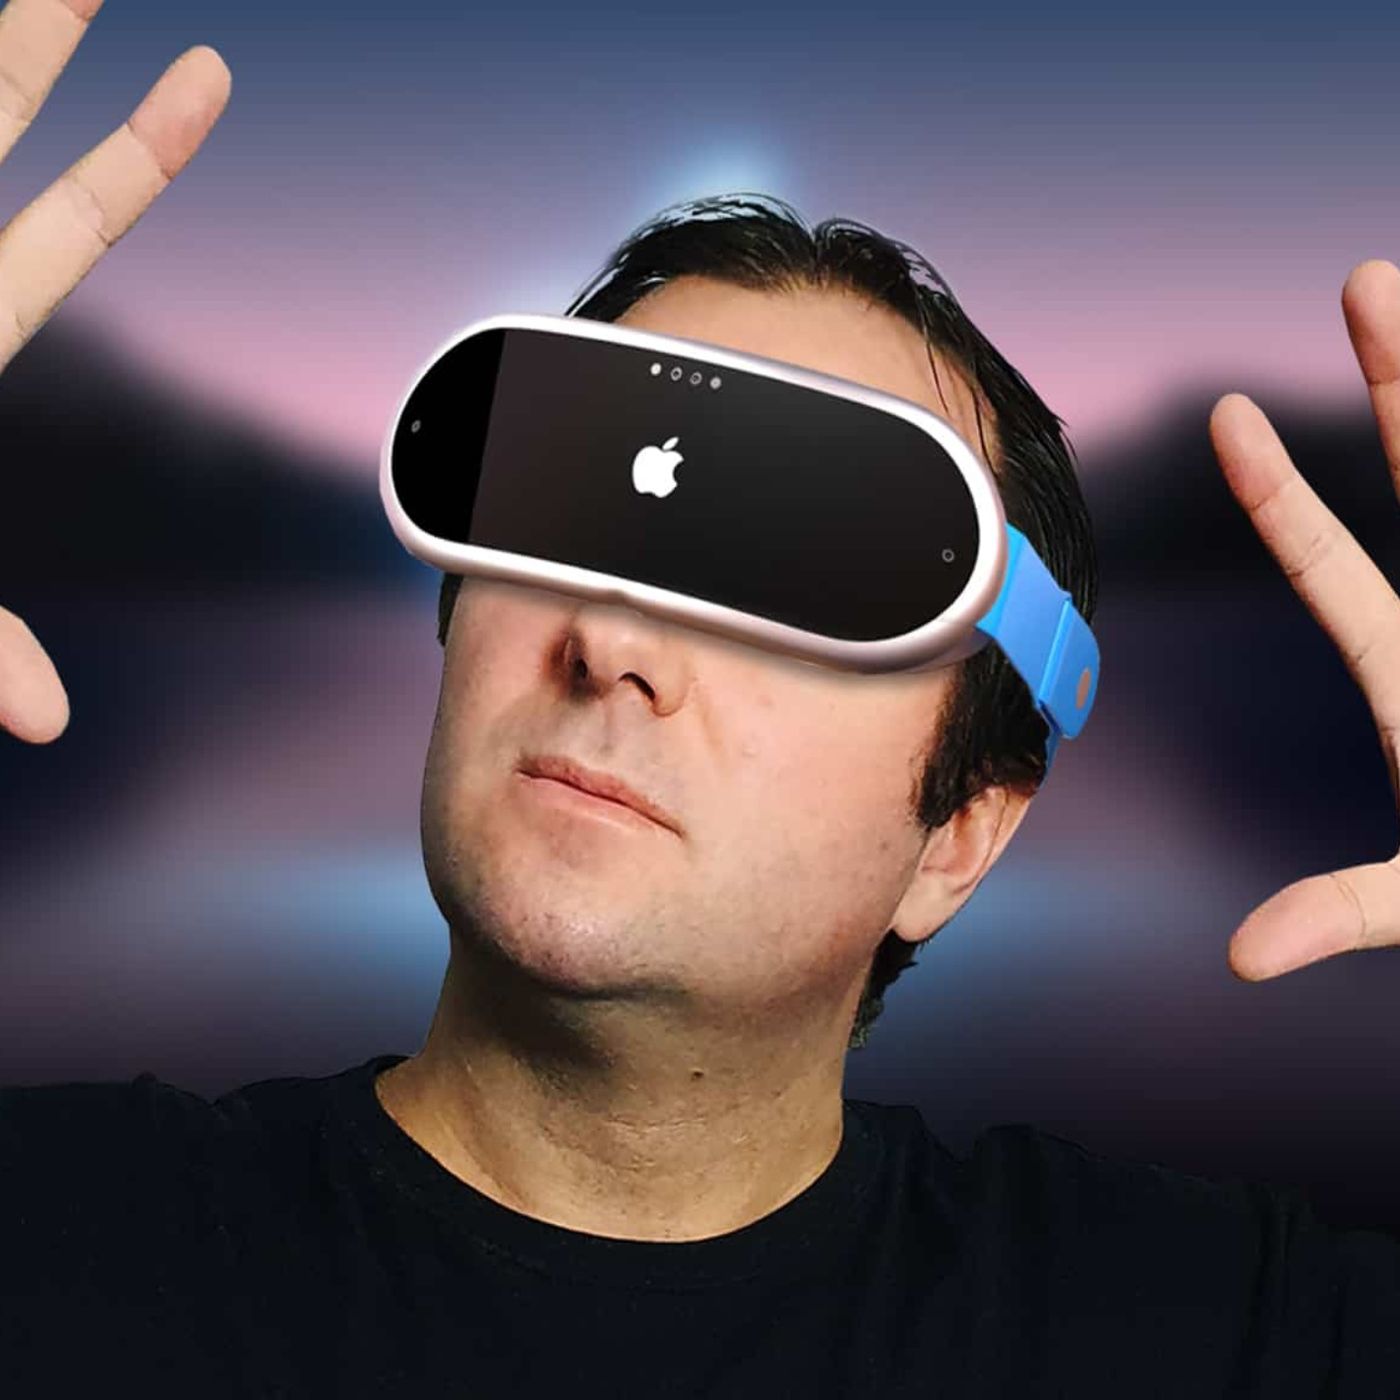 Is virtual better than reality?